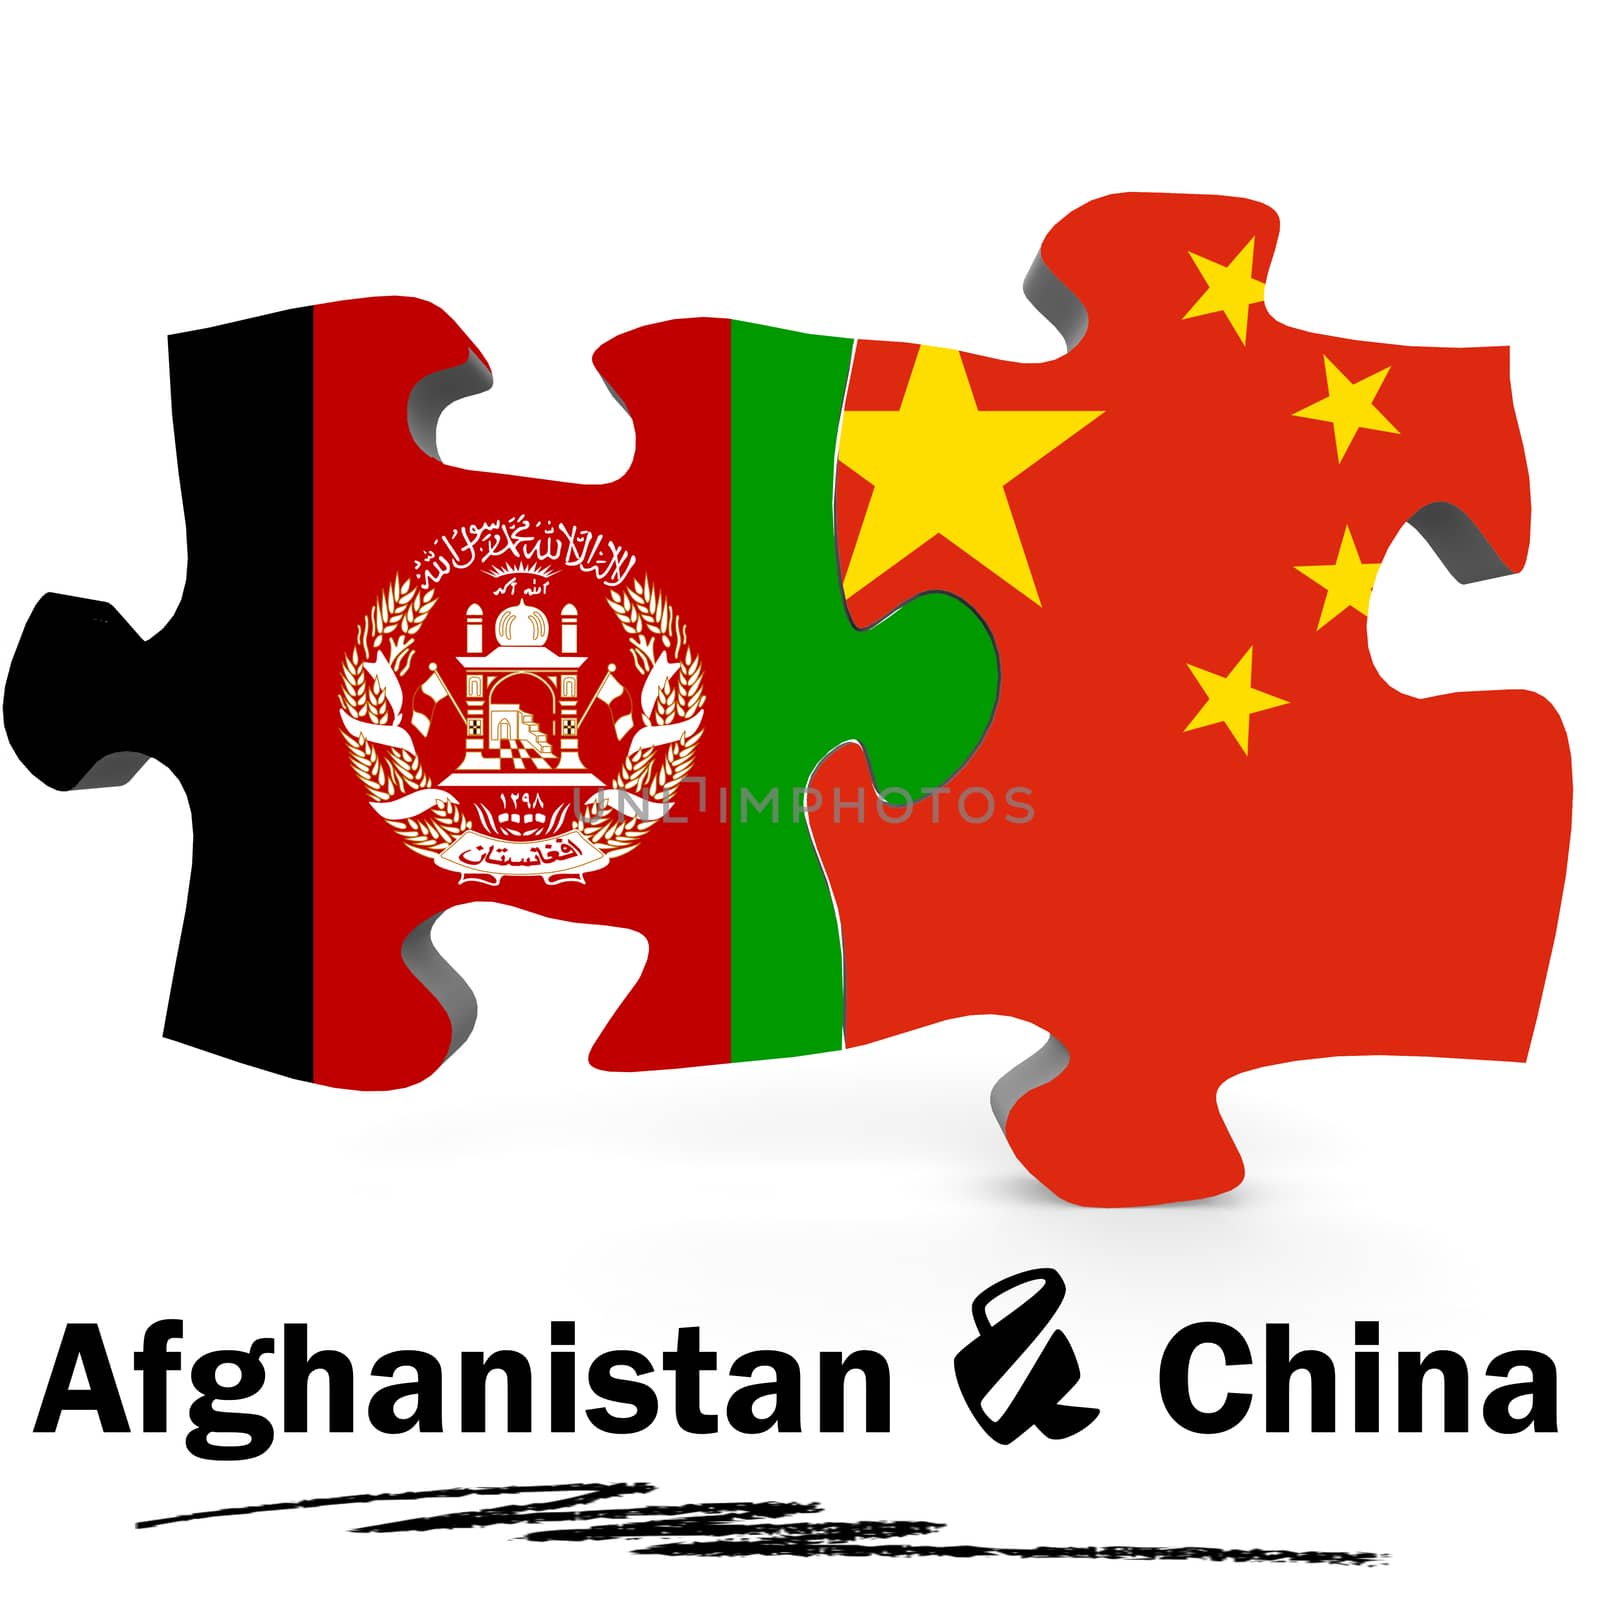 China and Afghanistan Flags in puzzle isolated on white background, 3D rendering